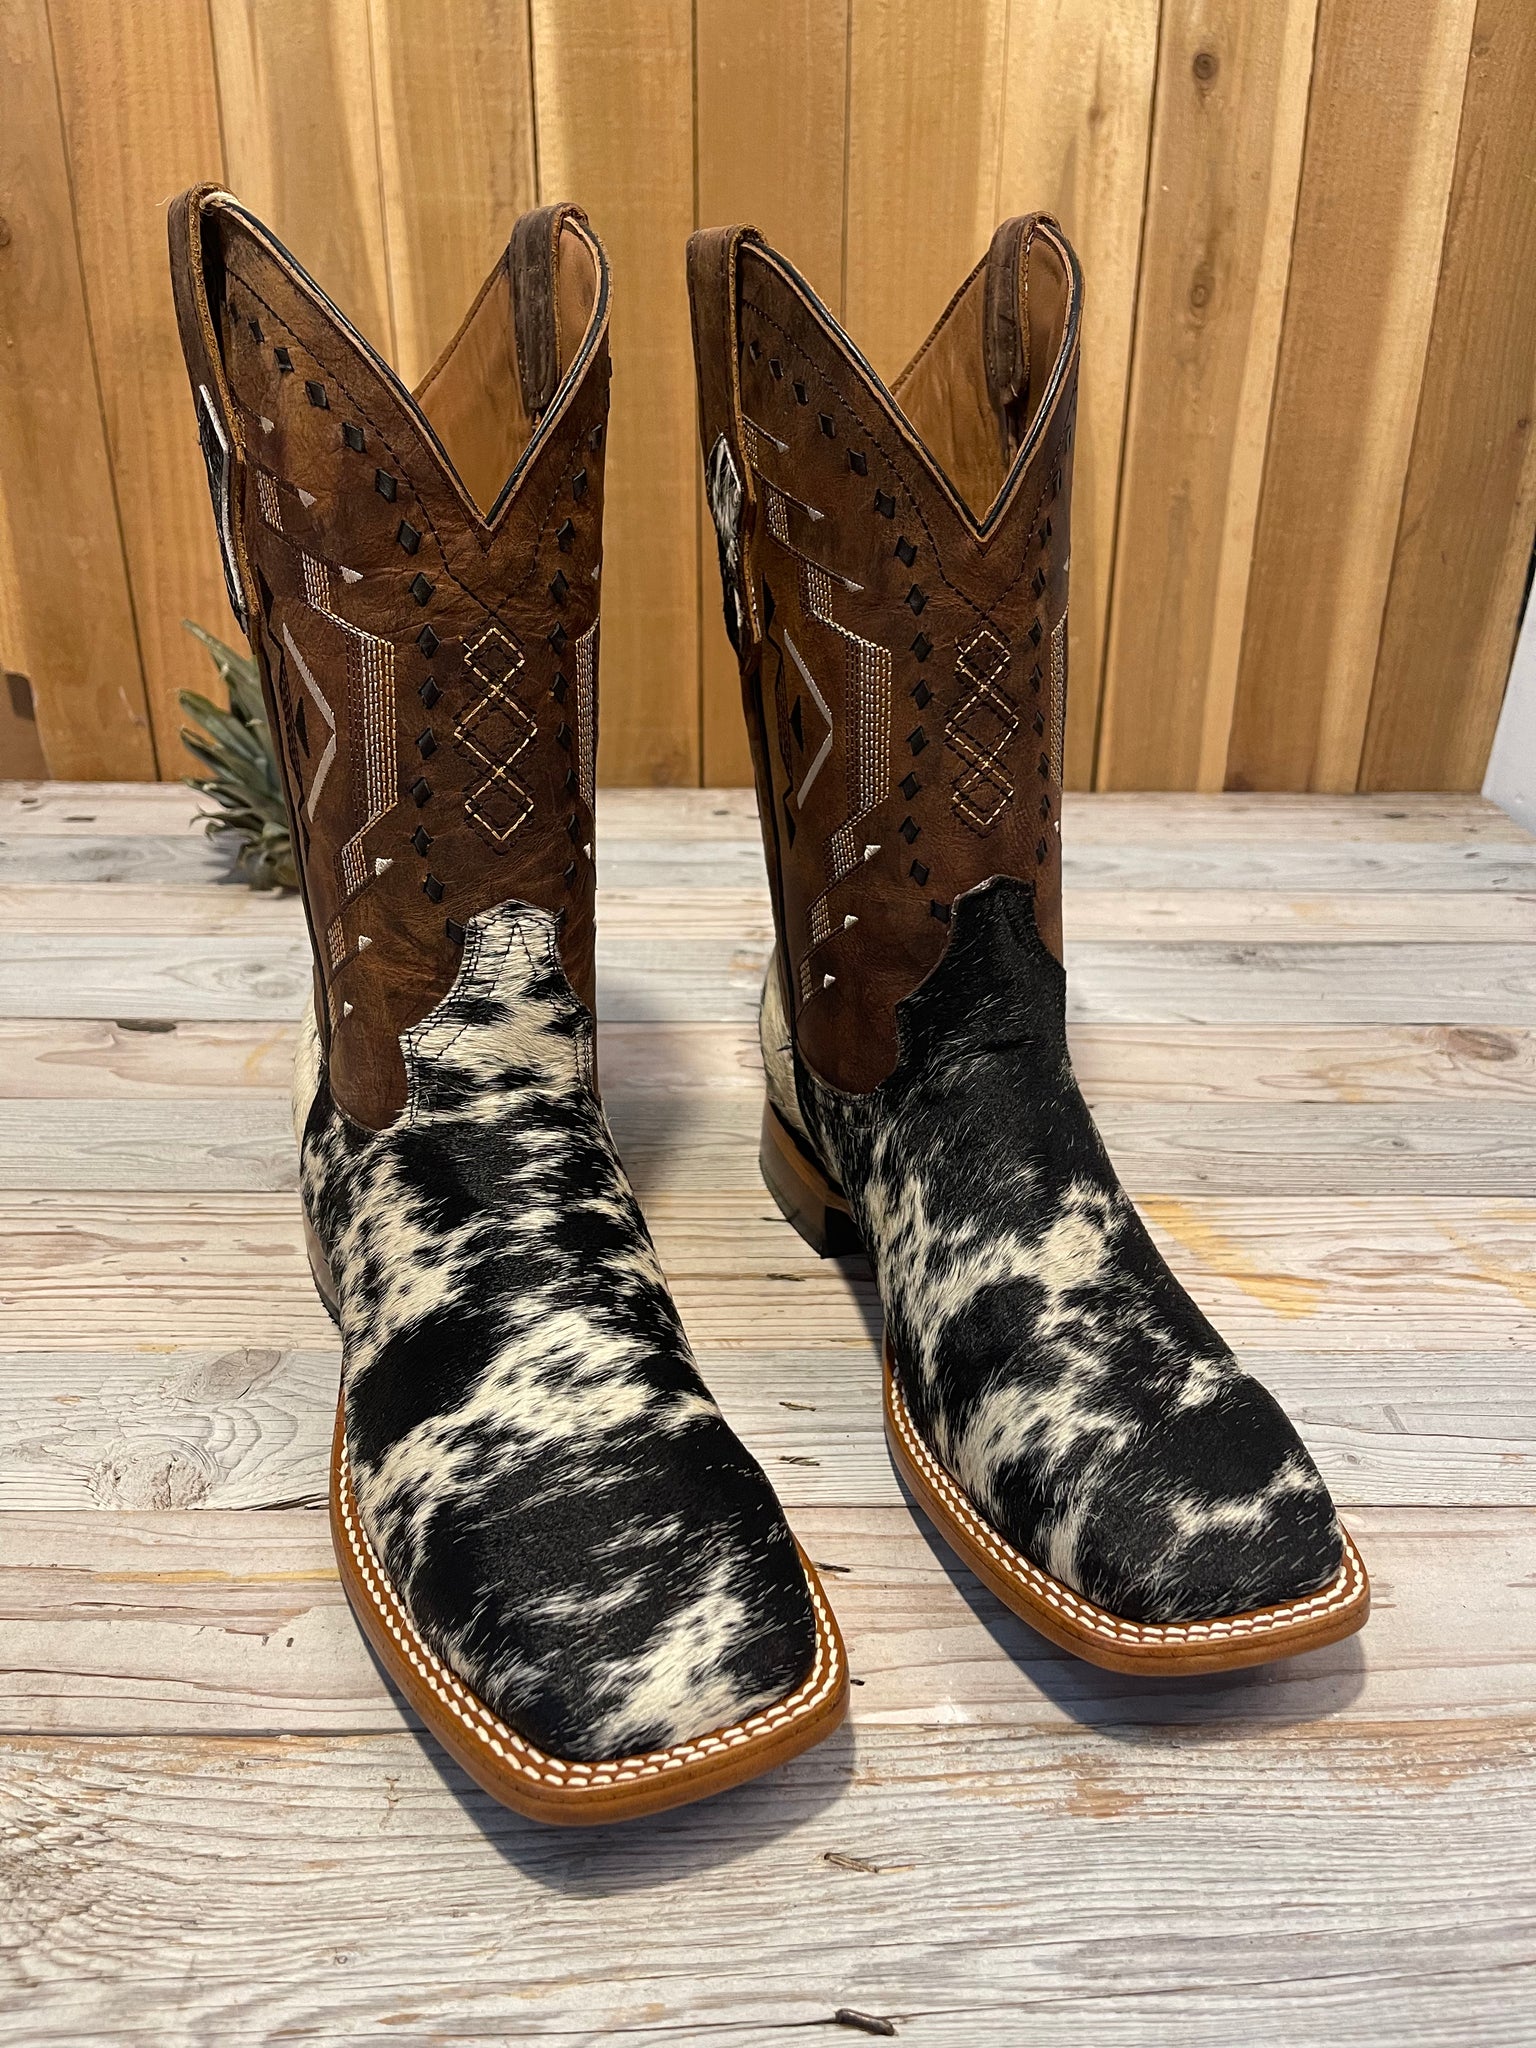 Exotic Cowhide Boot “Whiskey 2” Size 10.5